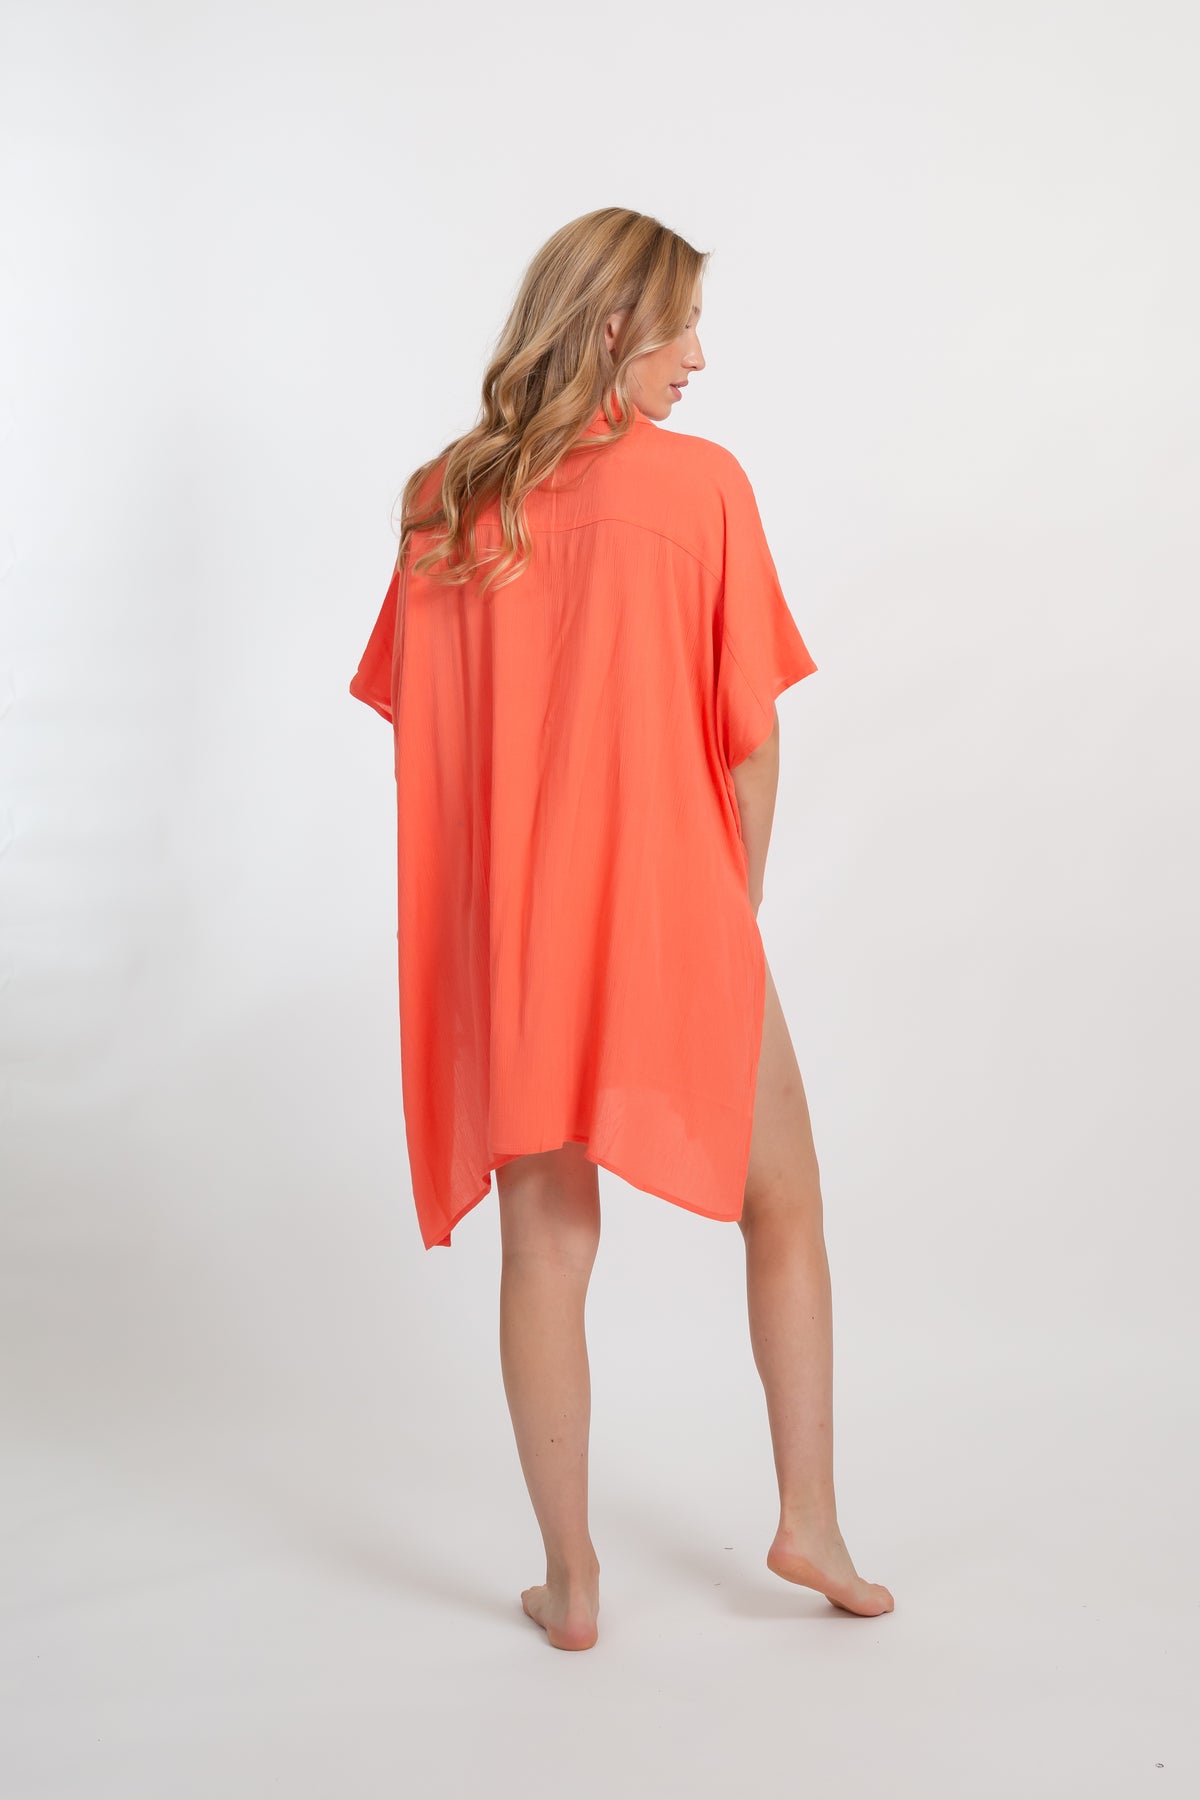 A blonde Caucasian model wearing a orange coral colored in "punch" big shirt bathing suit cover up shirt dress, standing in a studio, with her back facing towards and looking over her shoulder. 